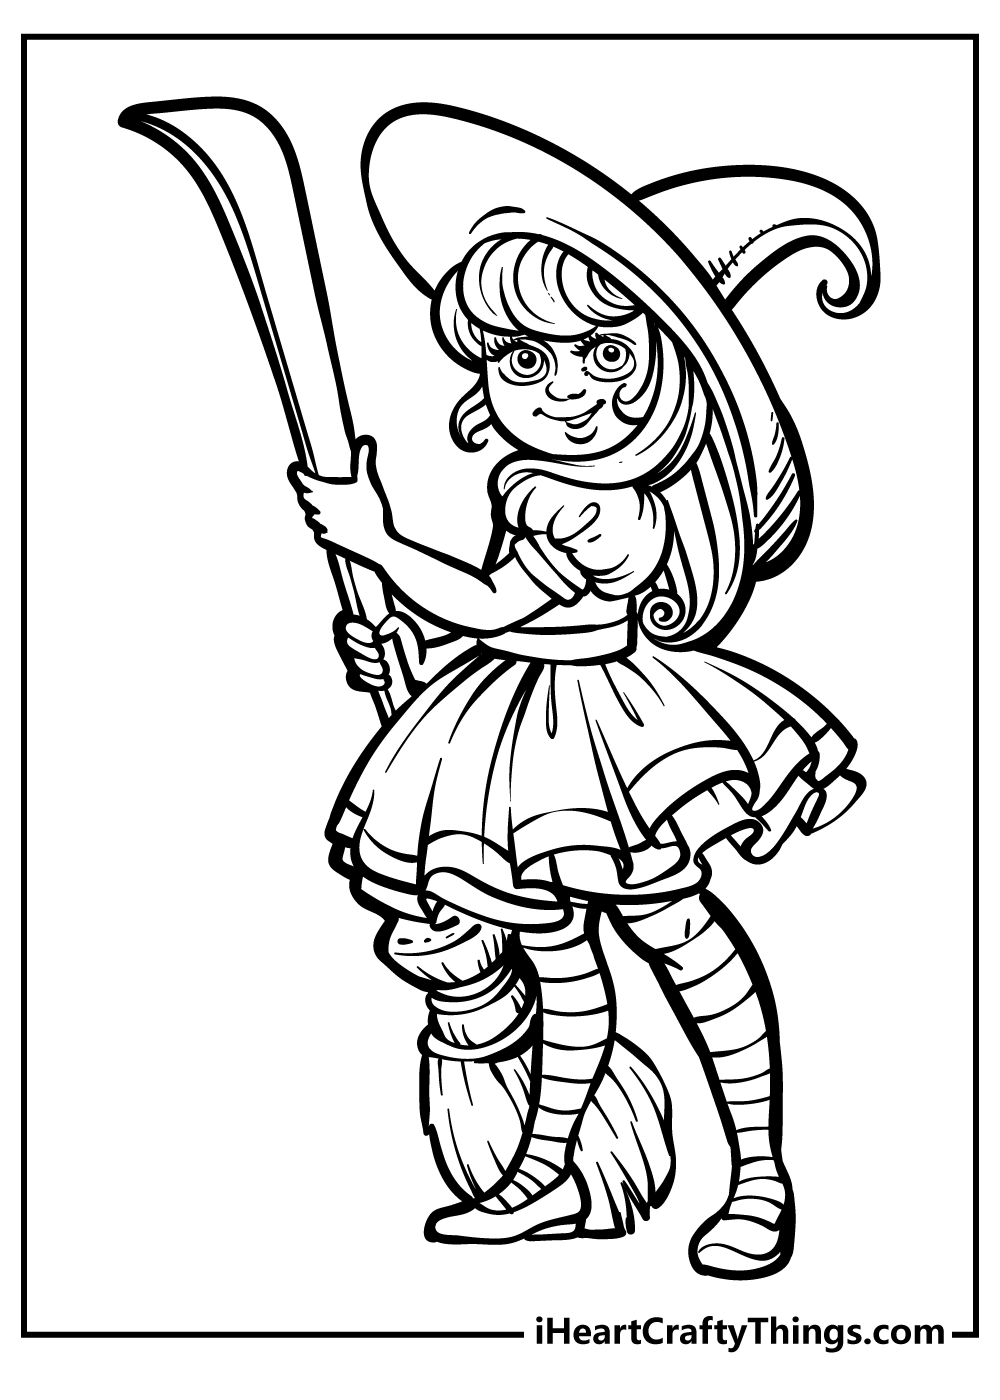 Halloween Coloring Pages for preschoolers free printable